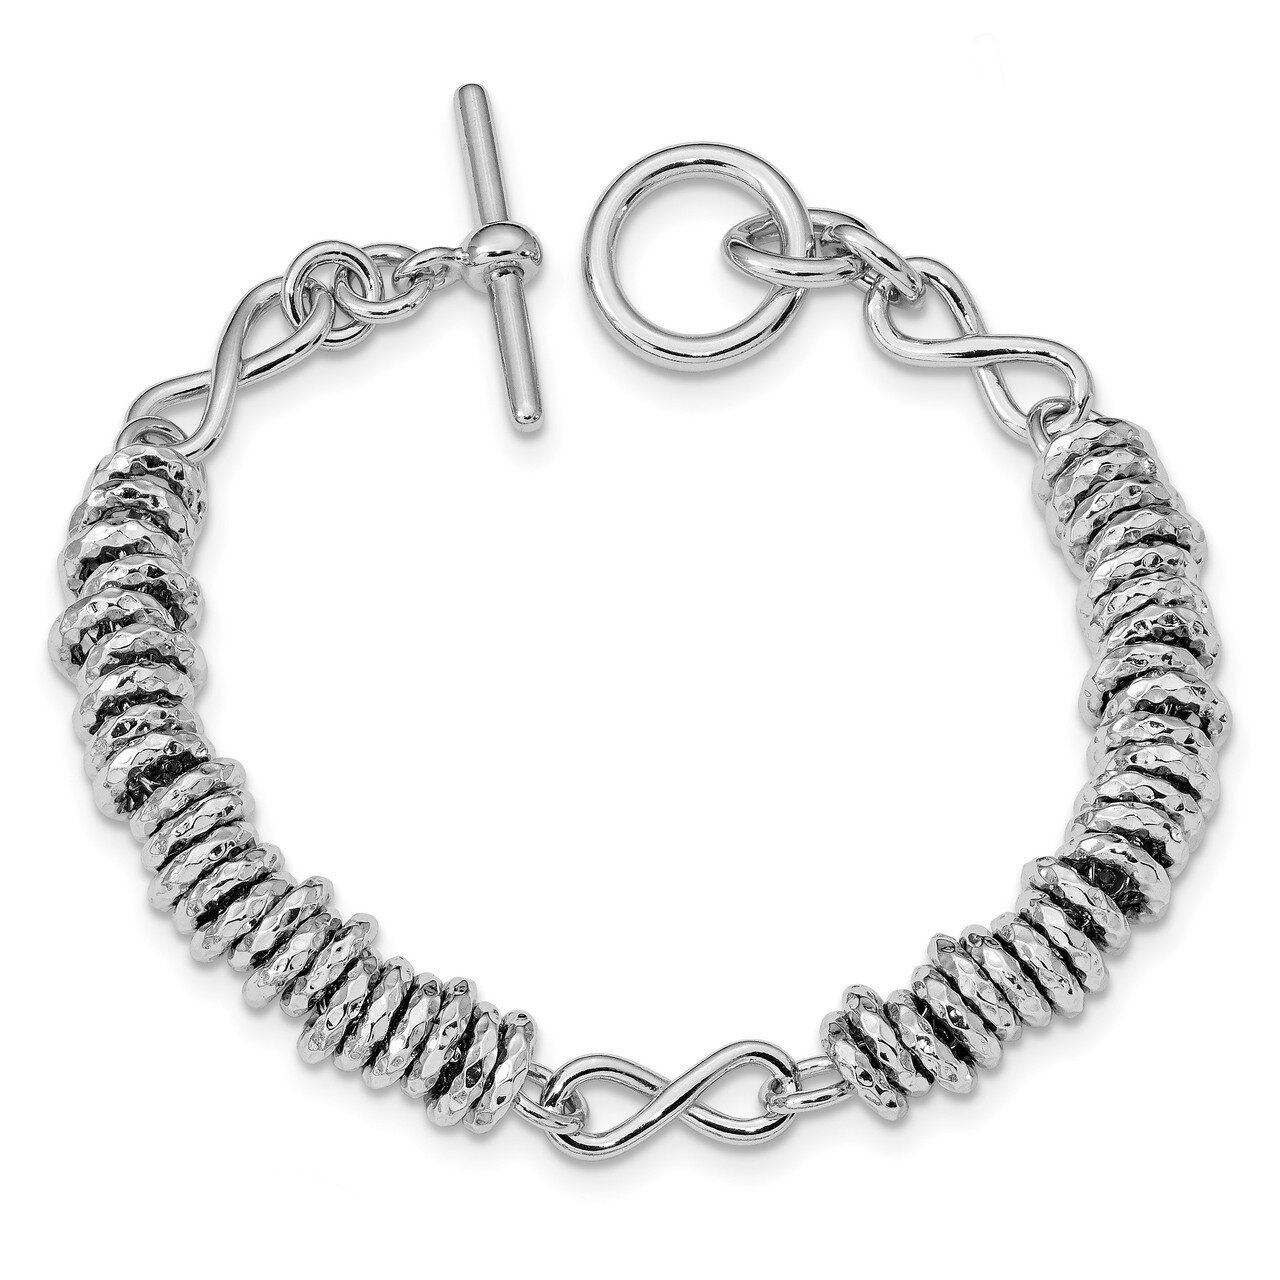 Textured Infinity Toggle Bracelet 7.75 Inch Sterling Silver Polished HB-QLF965-7.75